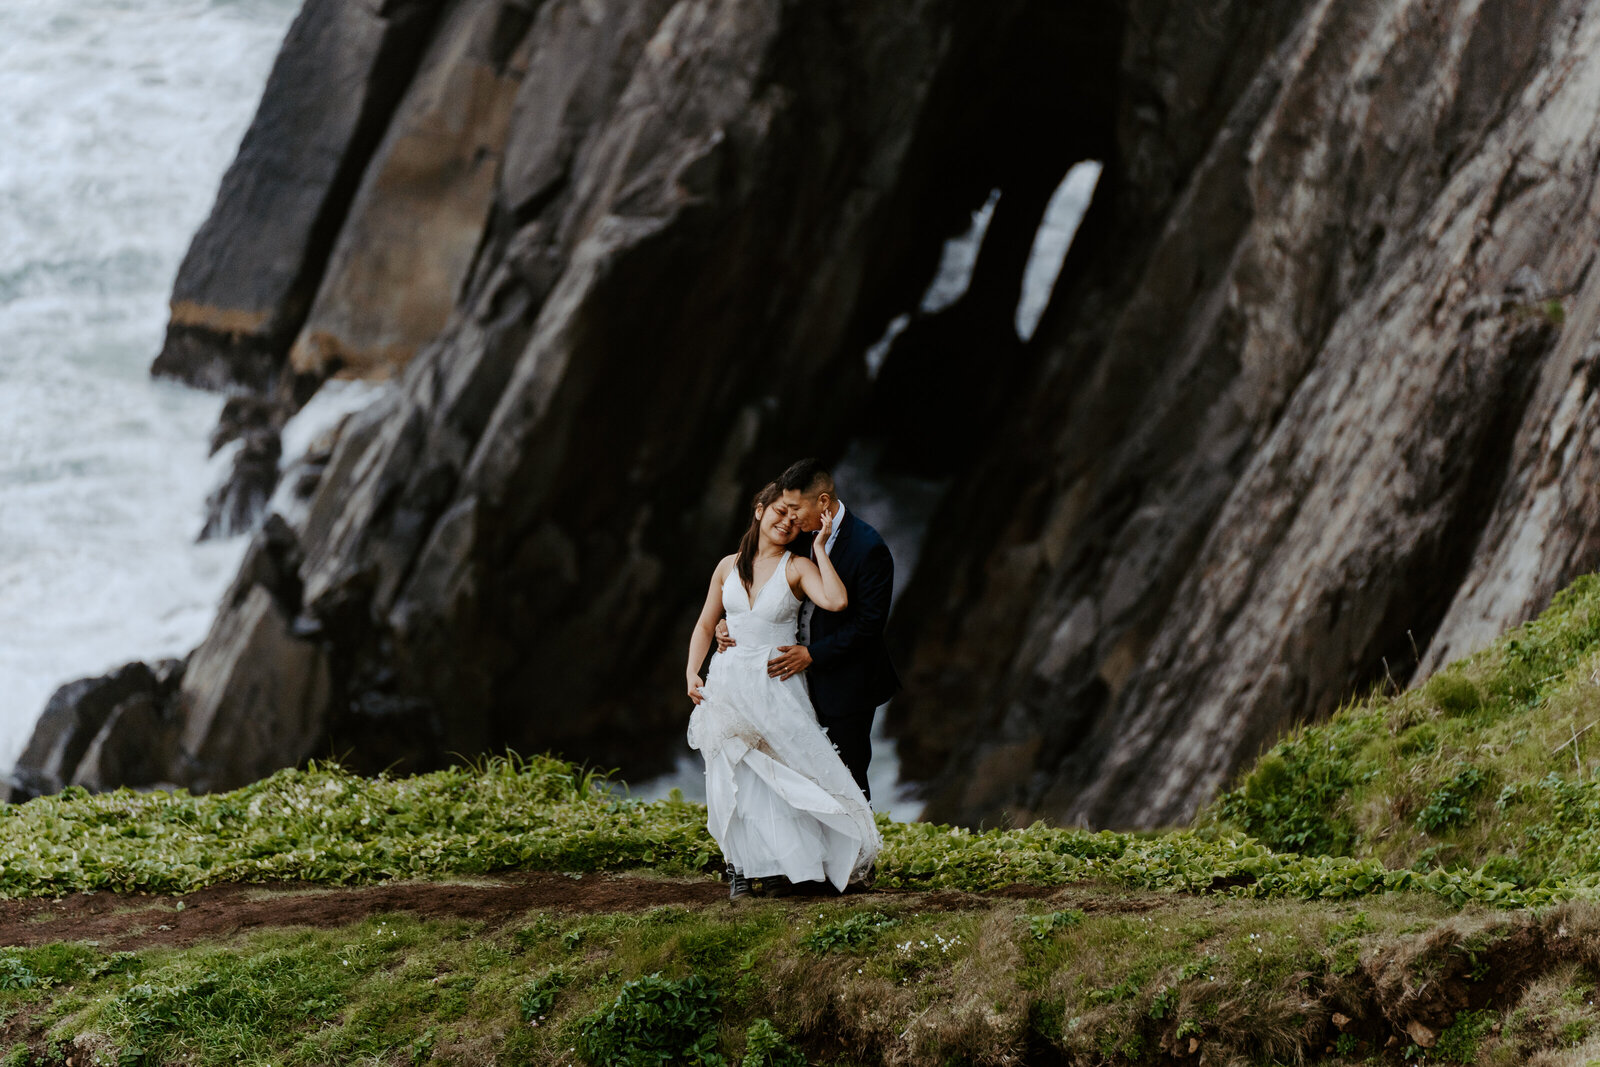 Bride and groom hugging in wedding attire on a grassy hillside with sheer rock cliffs and the Pacific Ocean in the background